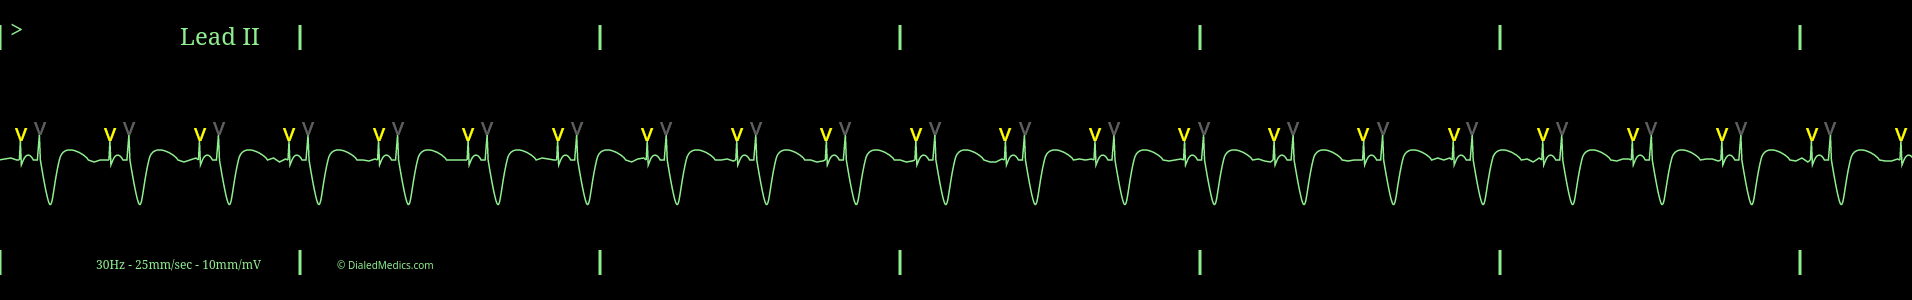 ECG Monitor capture showing AV Pacemaker with pacer spikes marked in yellow and grey.